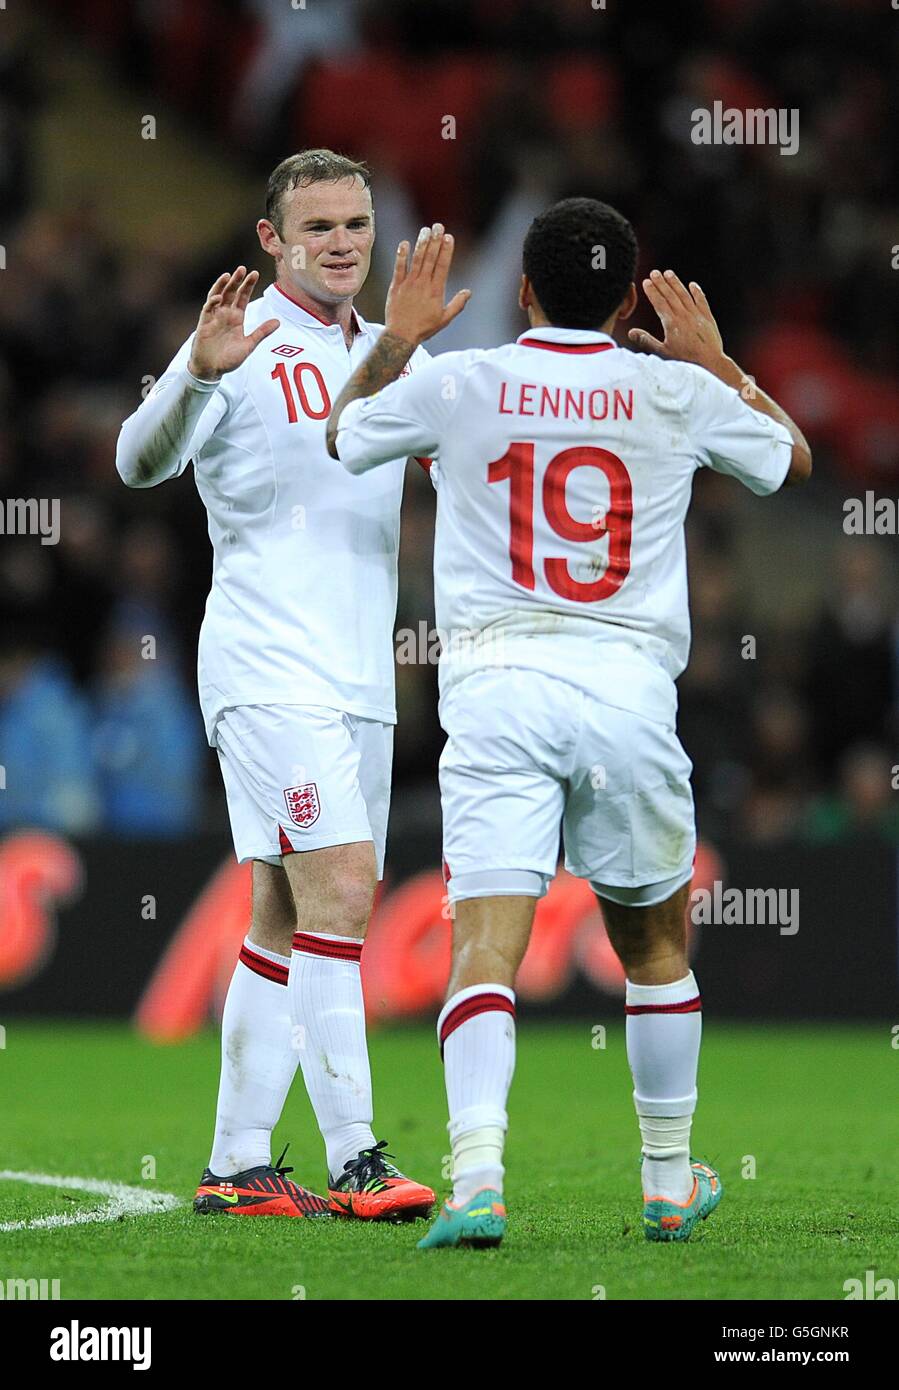 Soccer - 2014 FIFA World Cup - Qualifier - Group H - England v San Marino - Wembley Stadium. England's Wayne Rooney (left) celebrates with his team-mate Aaron Lennon (right) after scoring his team's third goal Stock Photo